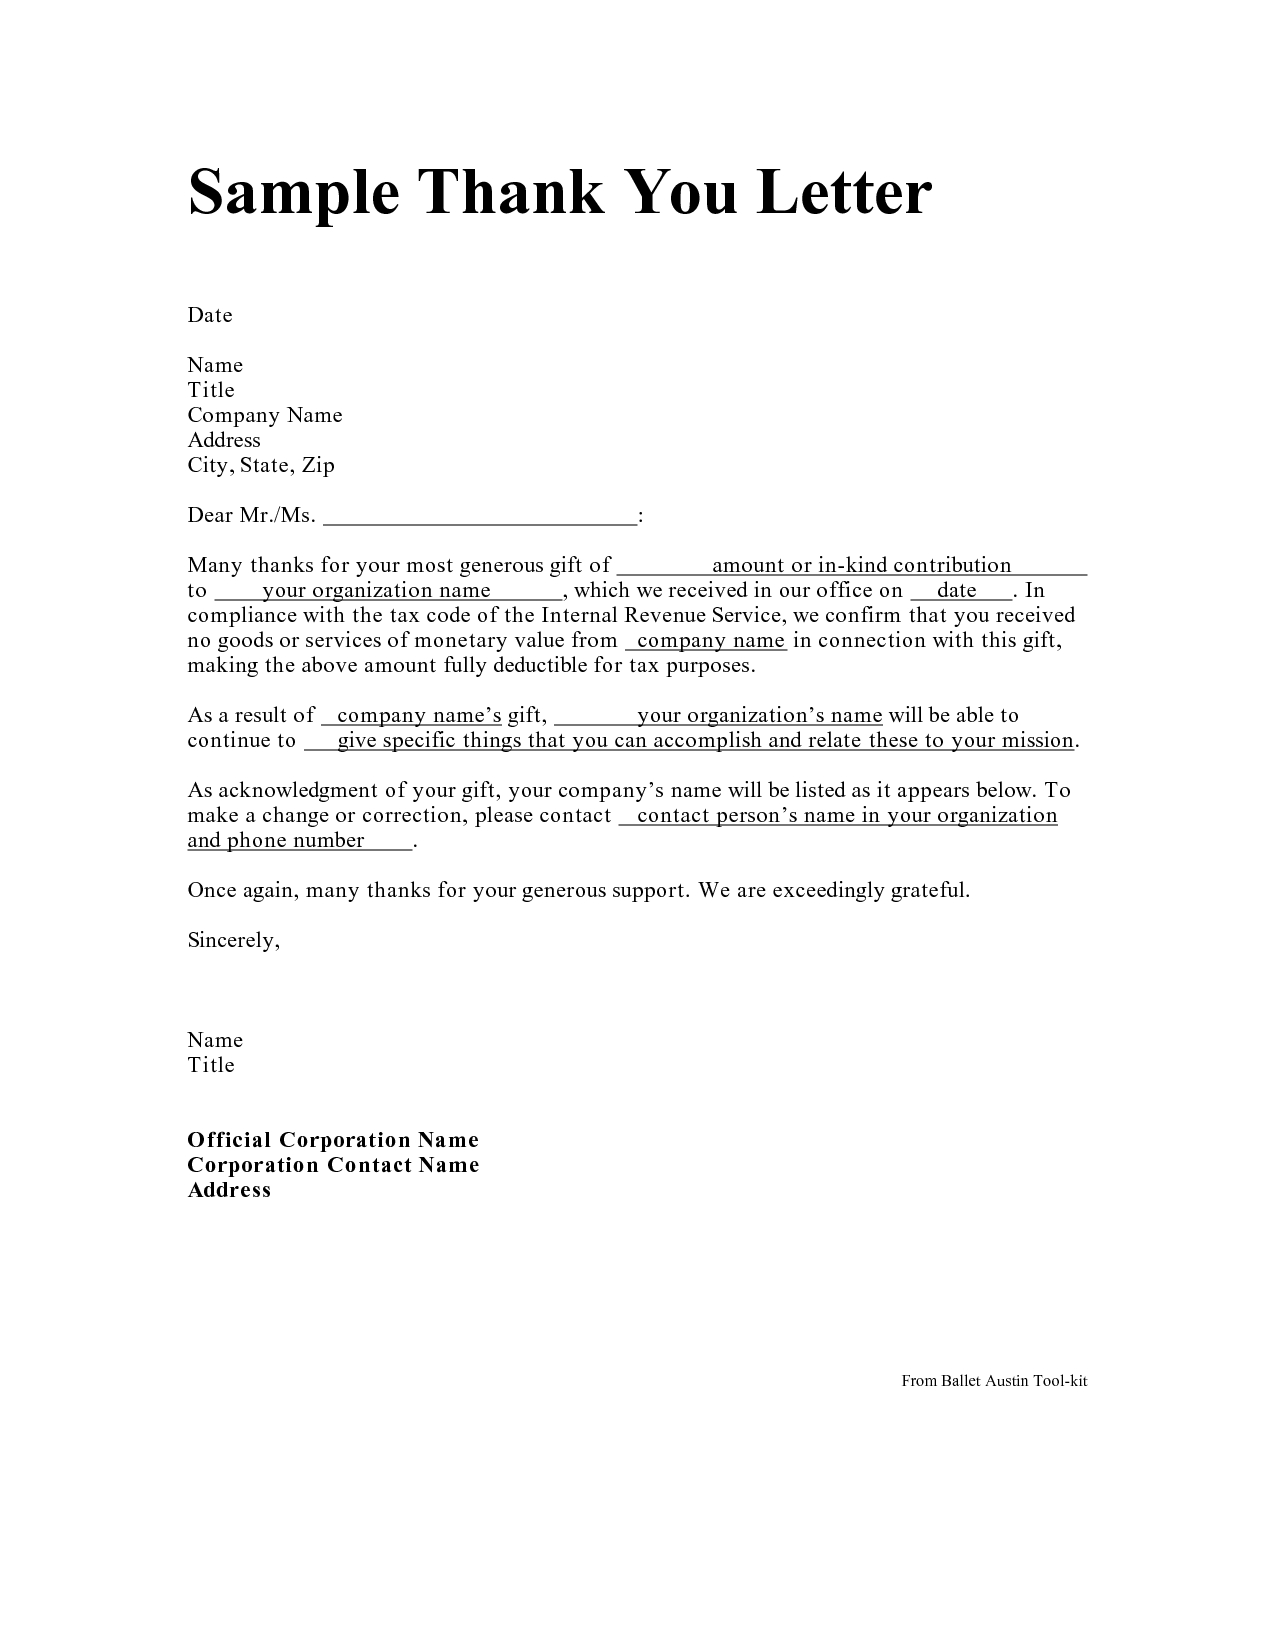 Confirmation Letter Template - Personal Thank You Letter Personal Thank You Letter Samples